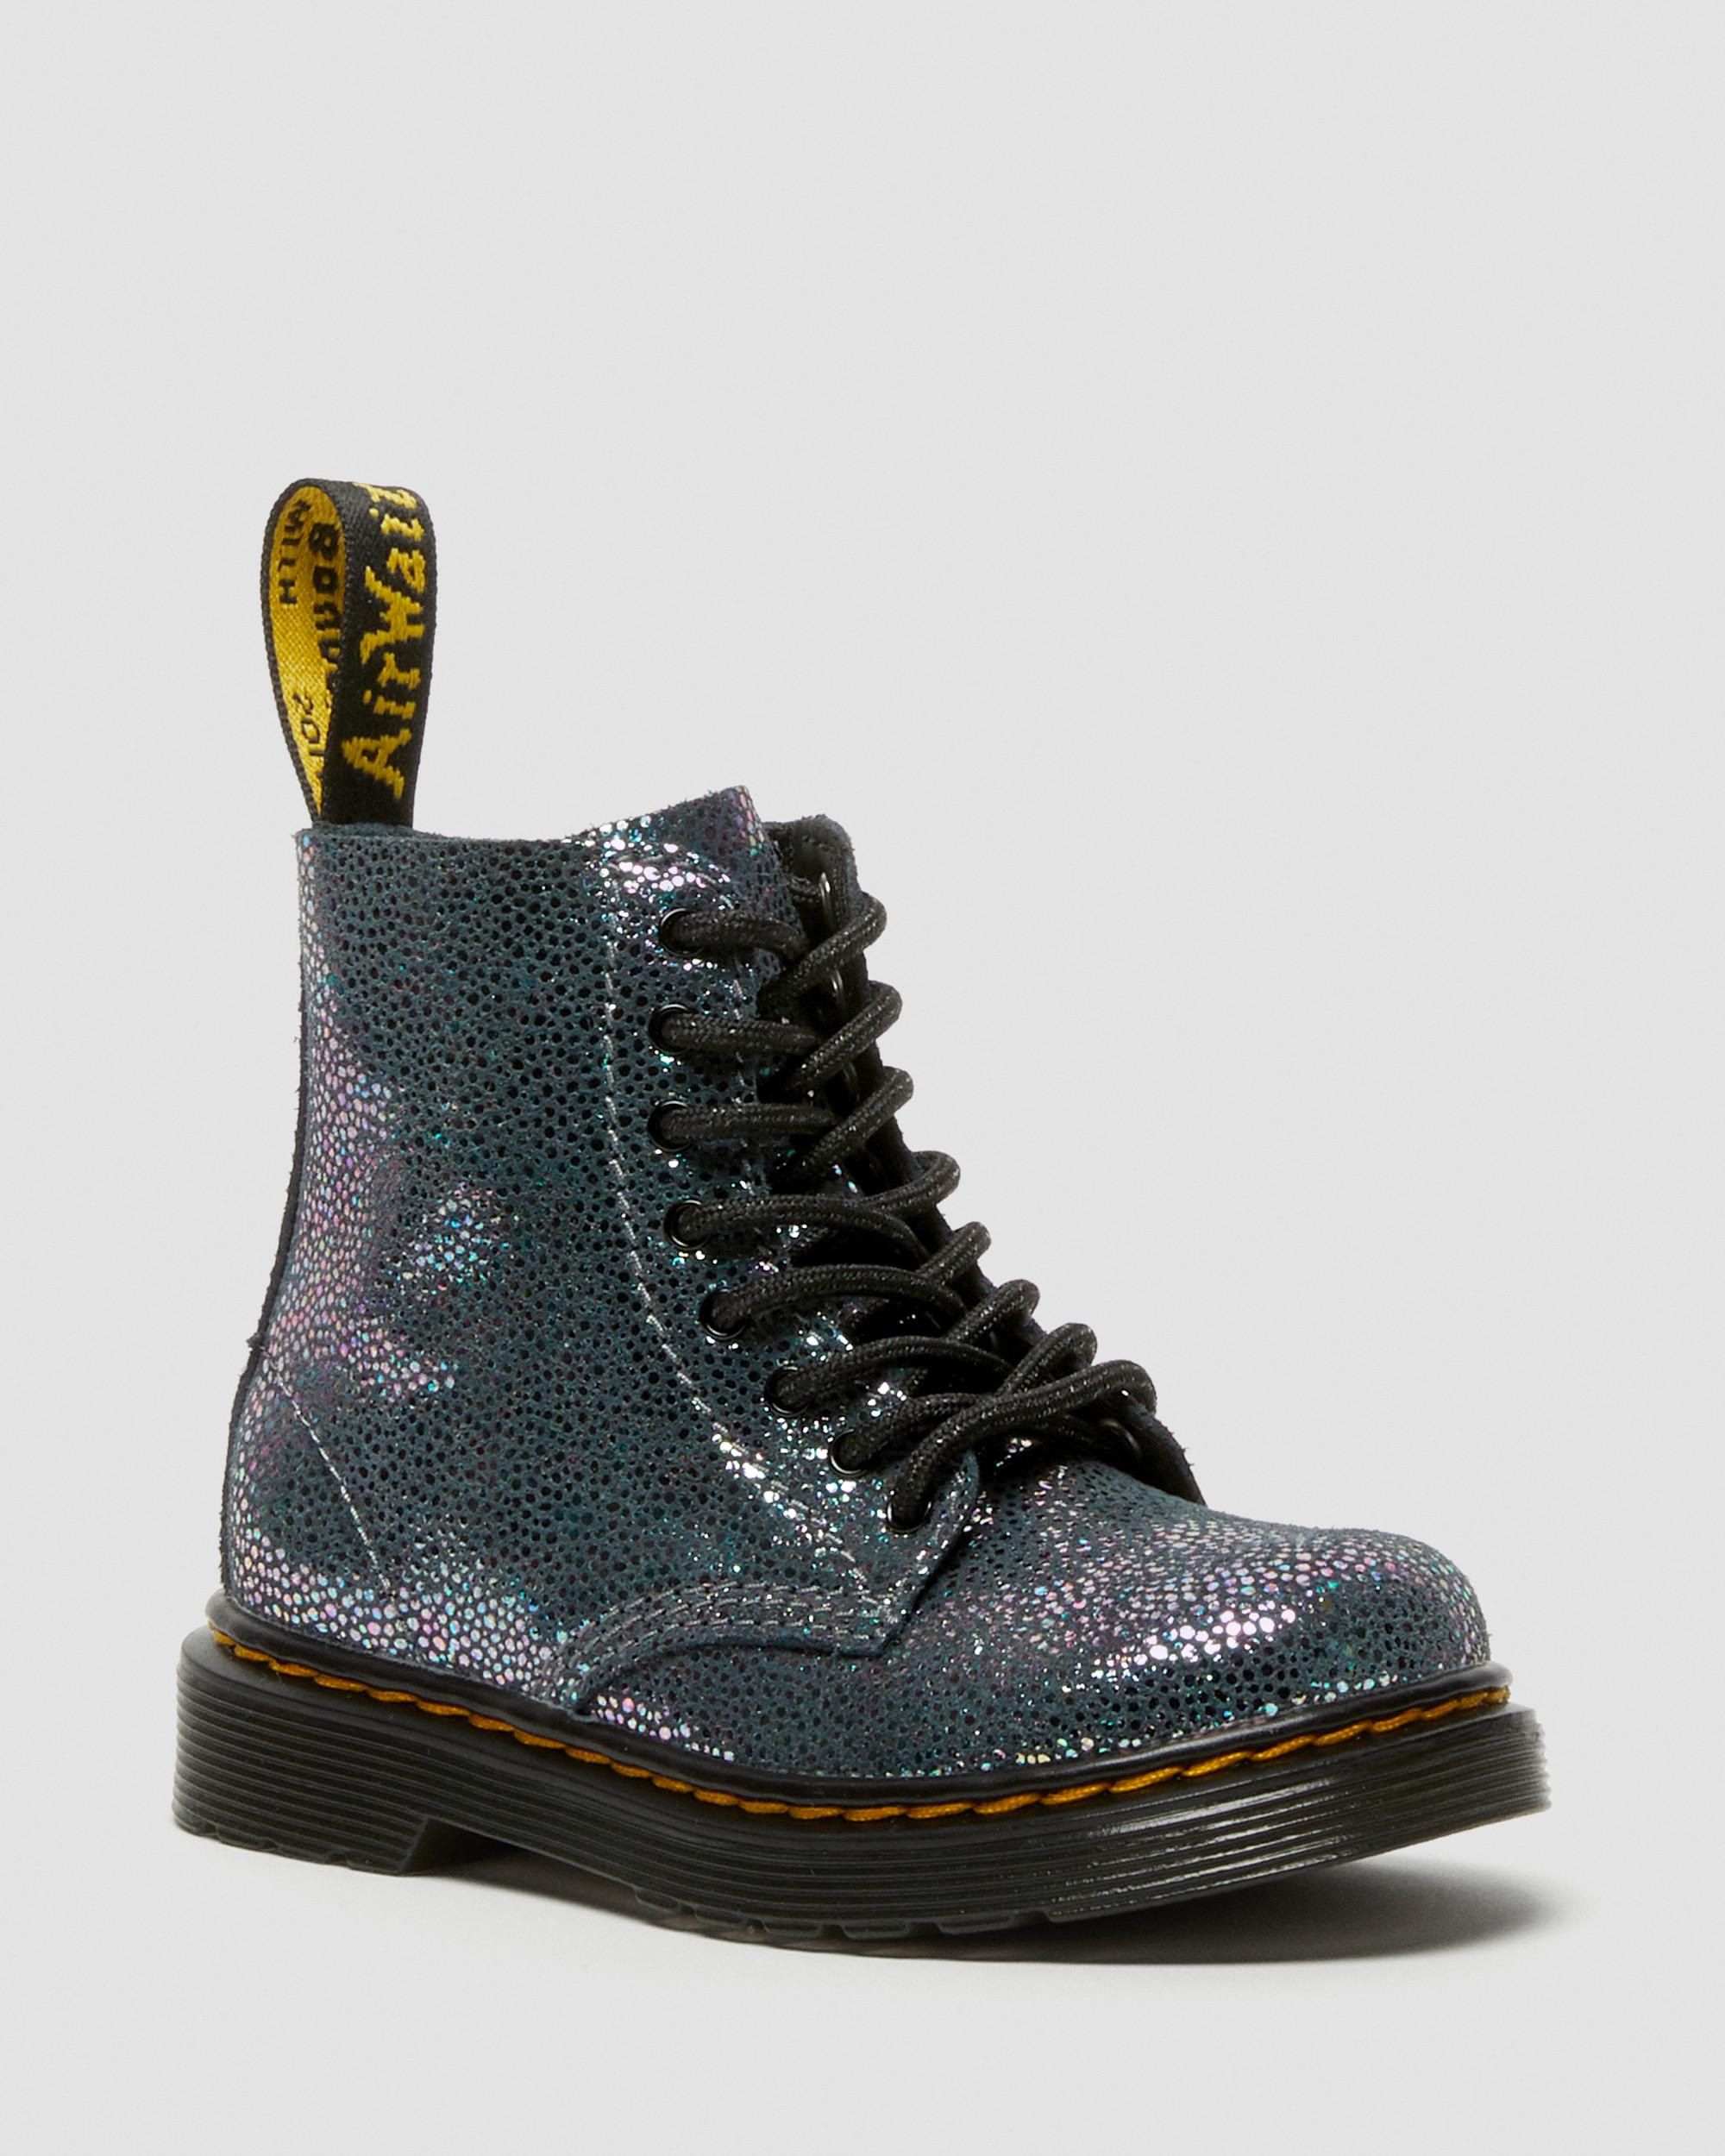 Toddler 1460 Pascal Iridescent Lace Up Boots in Metallic